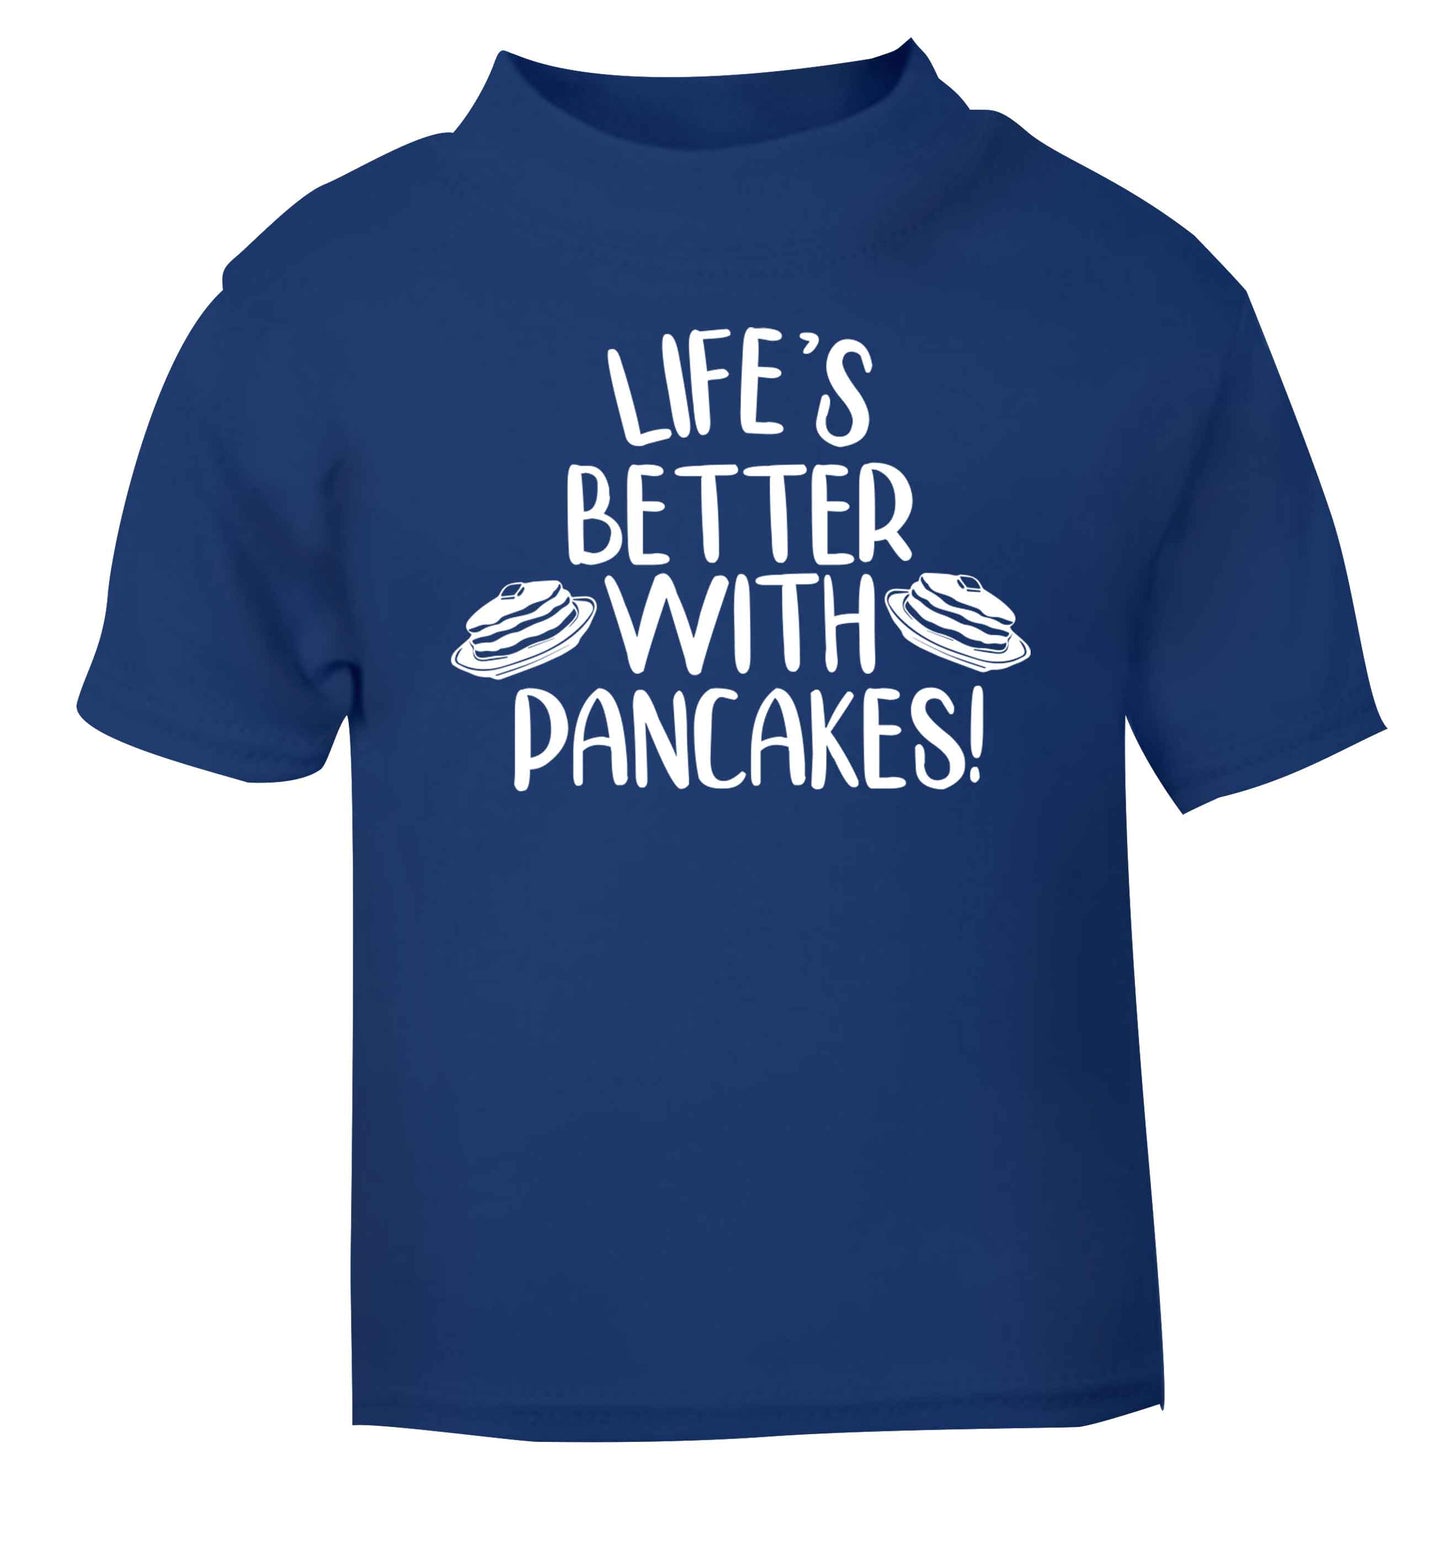 Life's better with pancakes blue baby toddler Tshirt 2 Years